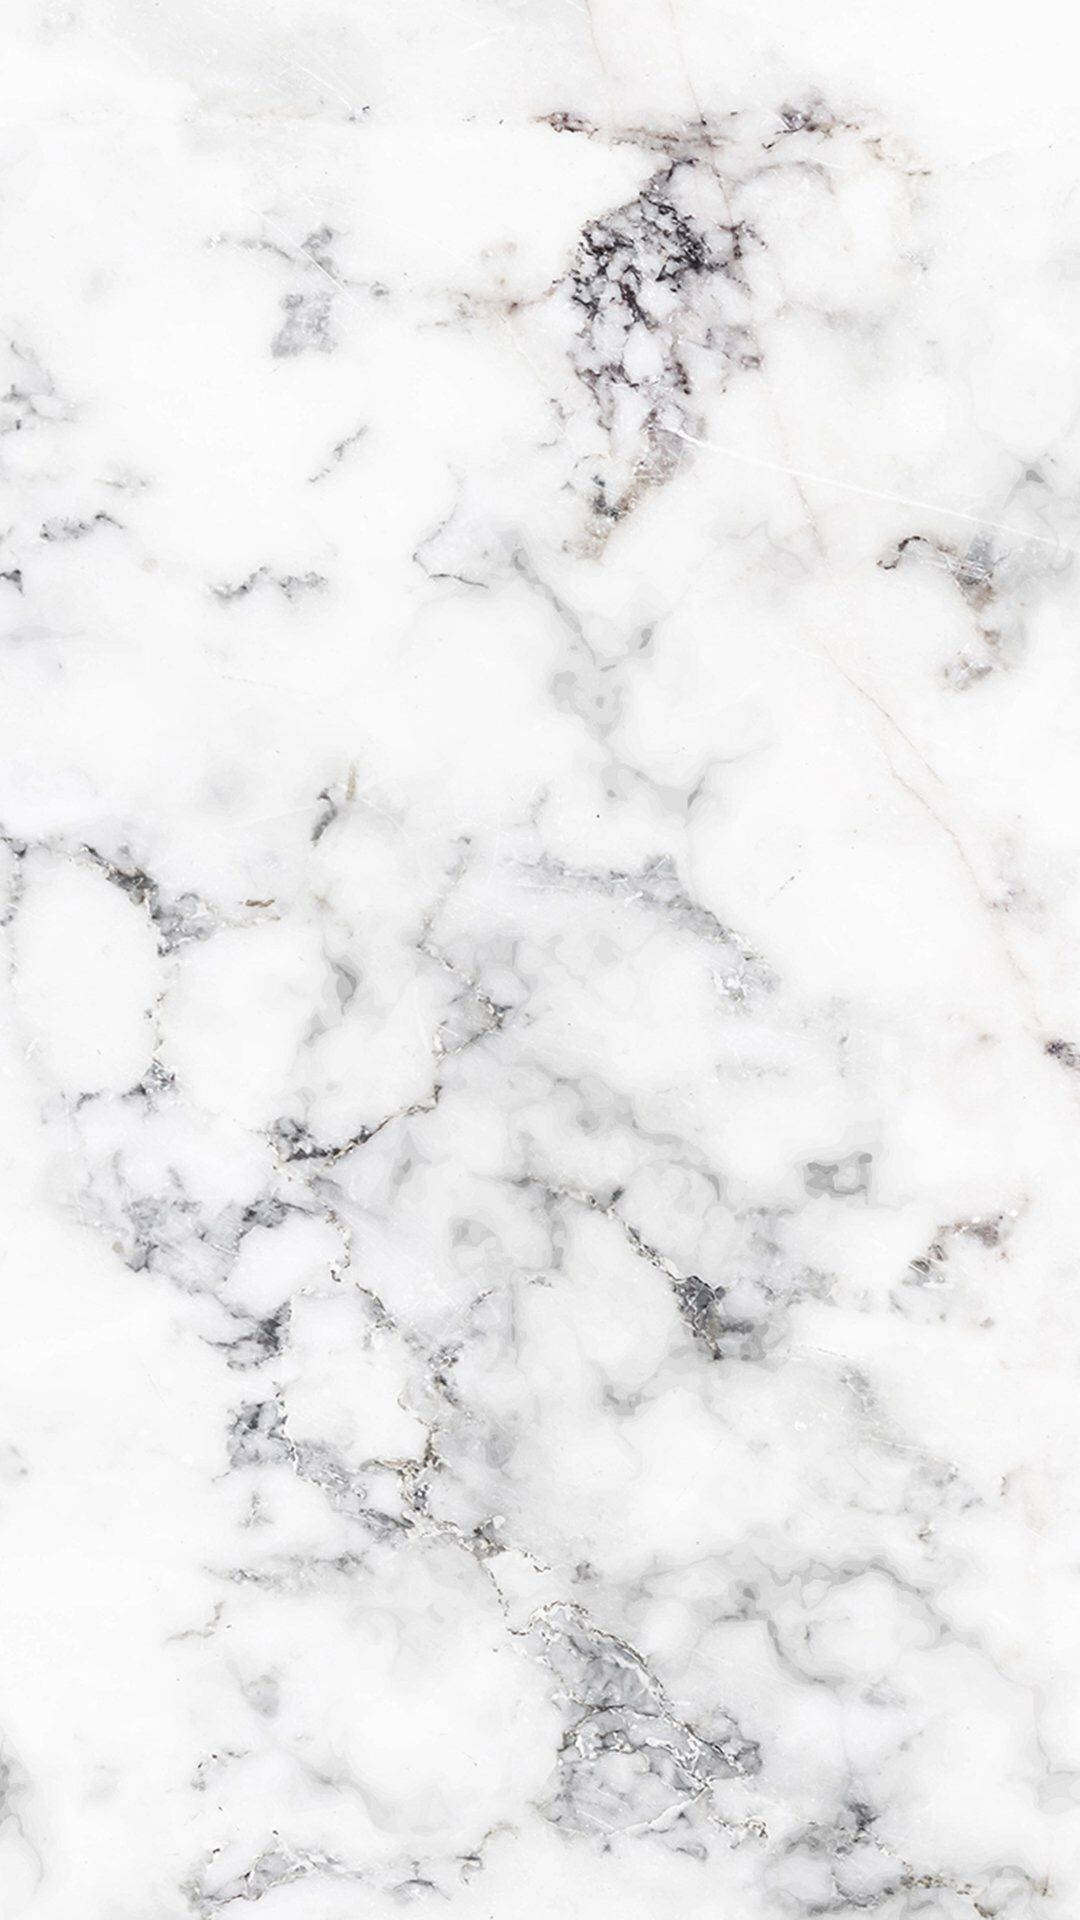 Cool Iphone White Marbled Wall Wallpaper